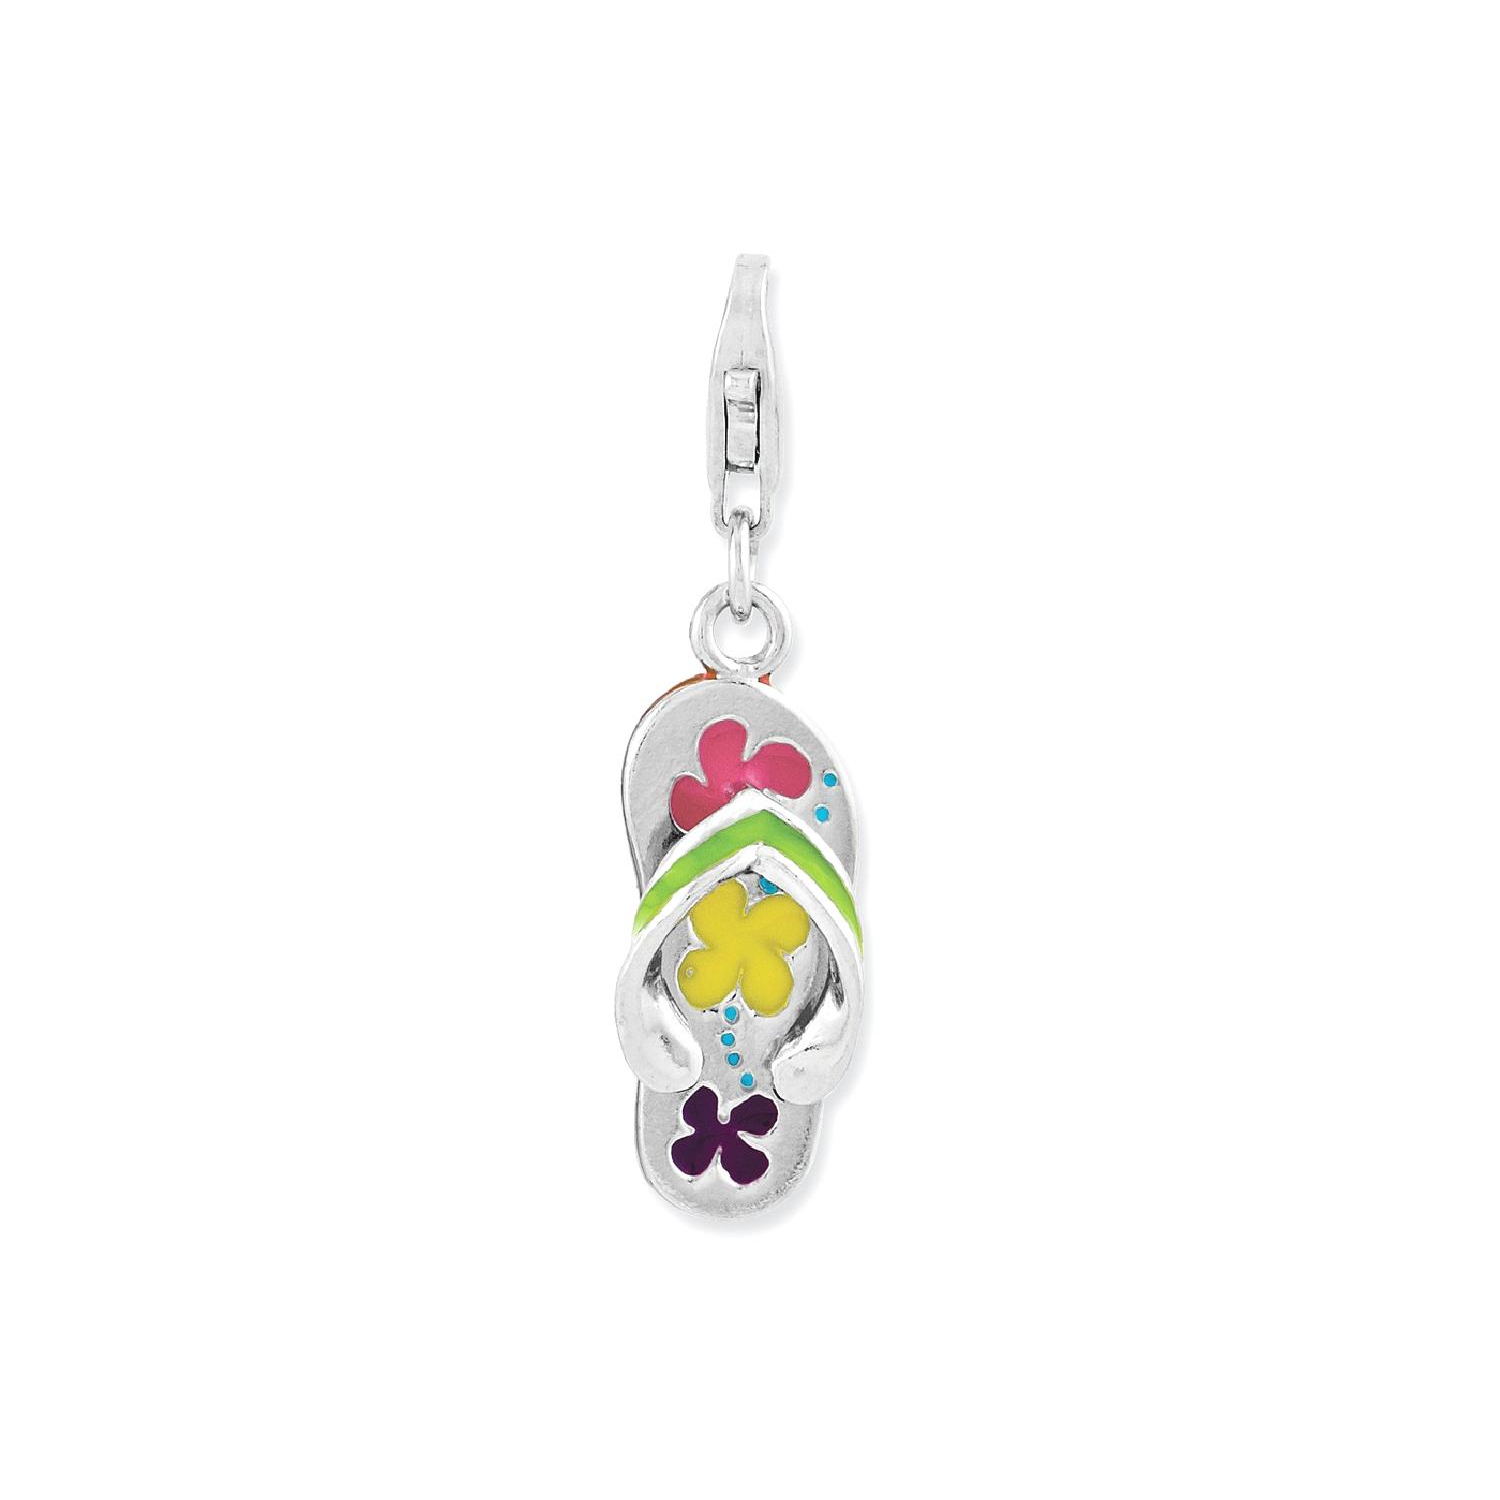 IceCarats 925 Sterling Silver 3 D Enameled Flip Flop Lobster Clasp Pendant Charm Necklace Sea Shore Sal